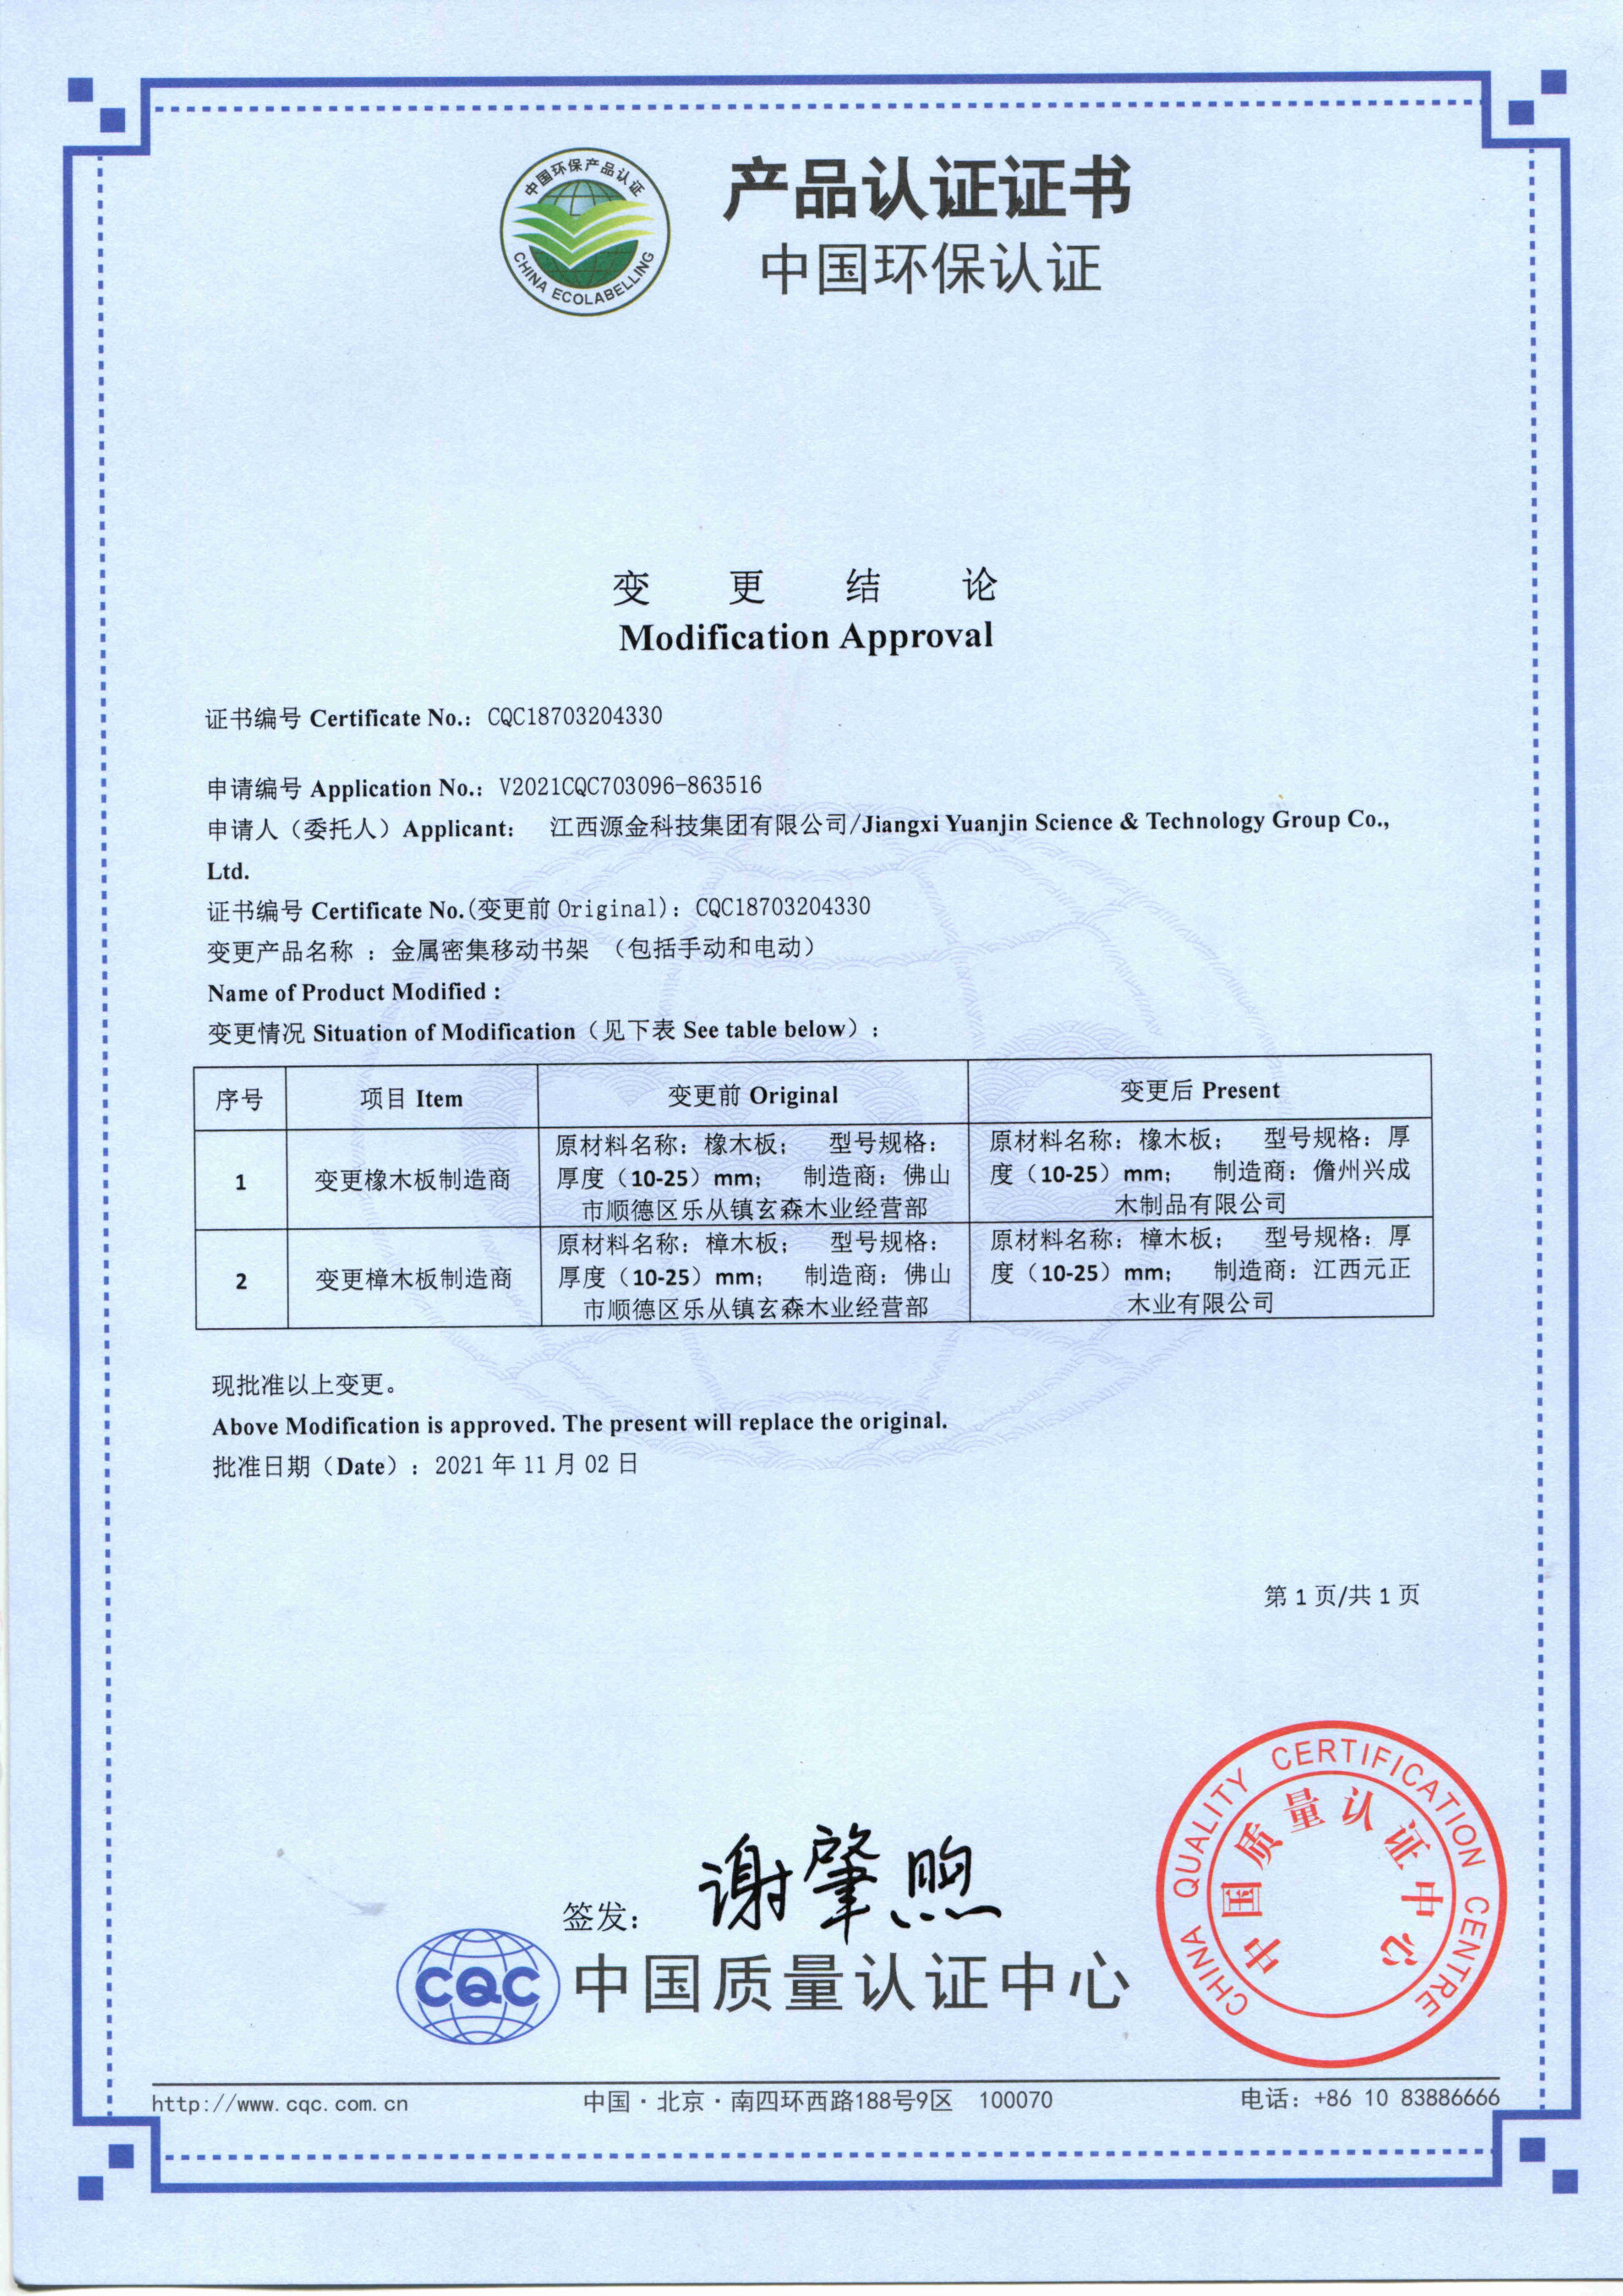 China Environmental Protection Certification in 2021 (CQC manual or intelligent)